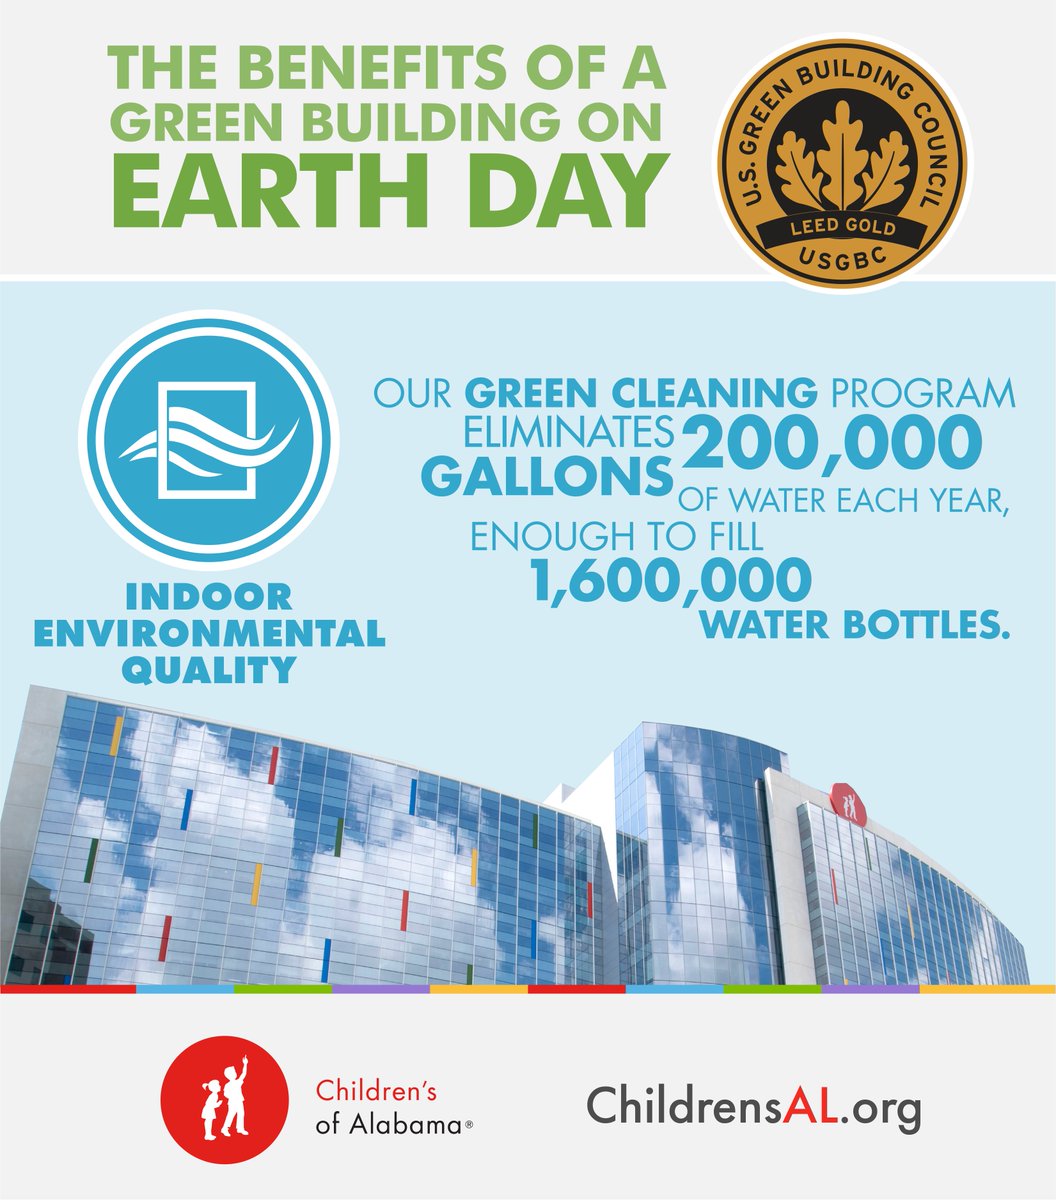 🌎 We're celebrating our green building on #EarthDay! Children's of Alabama's Benjamin Russell Hospital for Children is the first healthcare facility in Alabama, and one of the first of its kind in the U.S., to gain LEED Gold status.